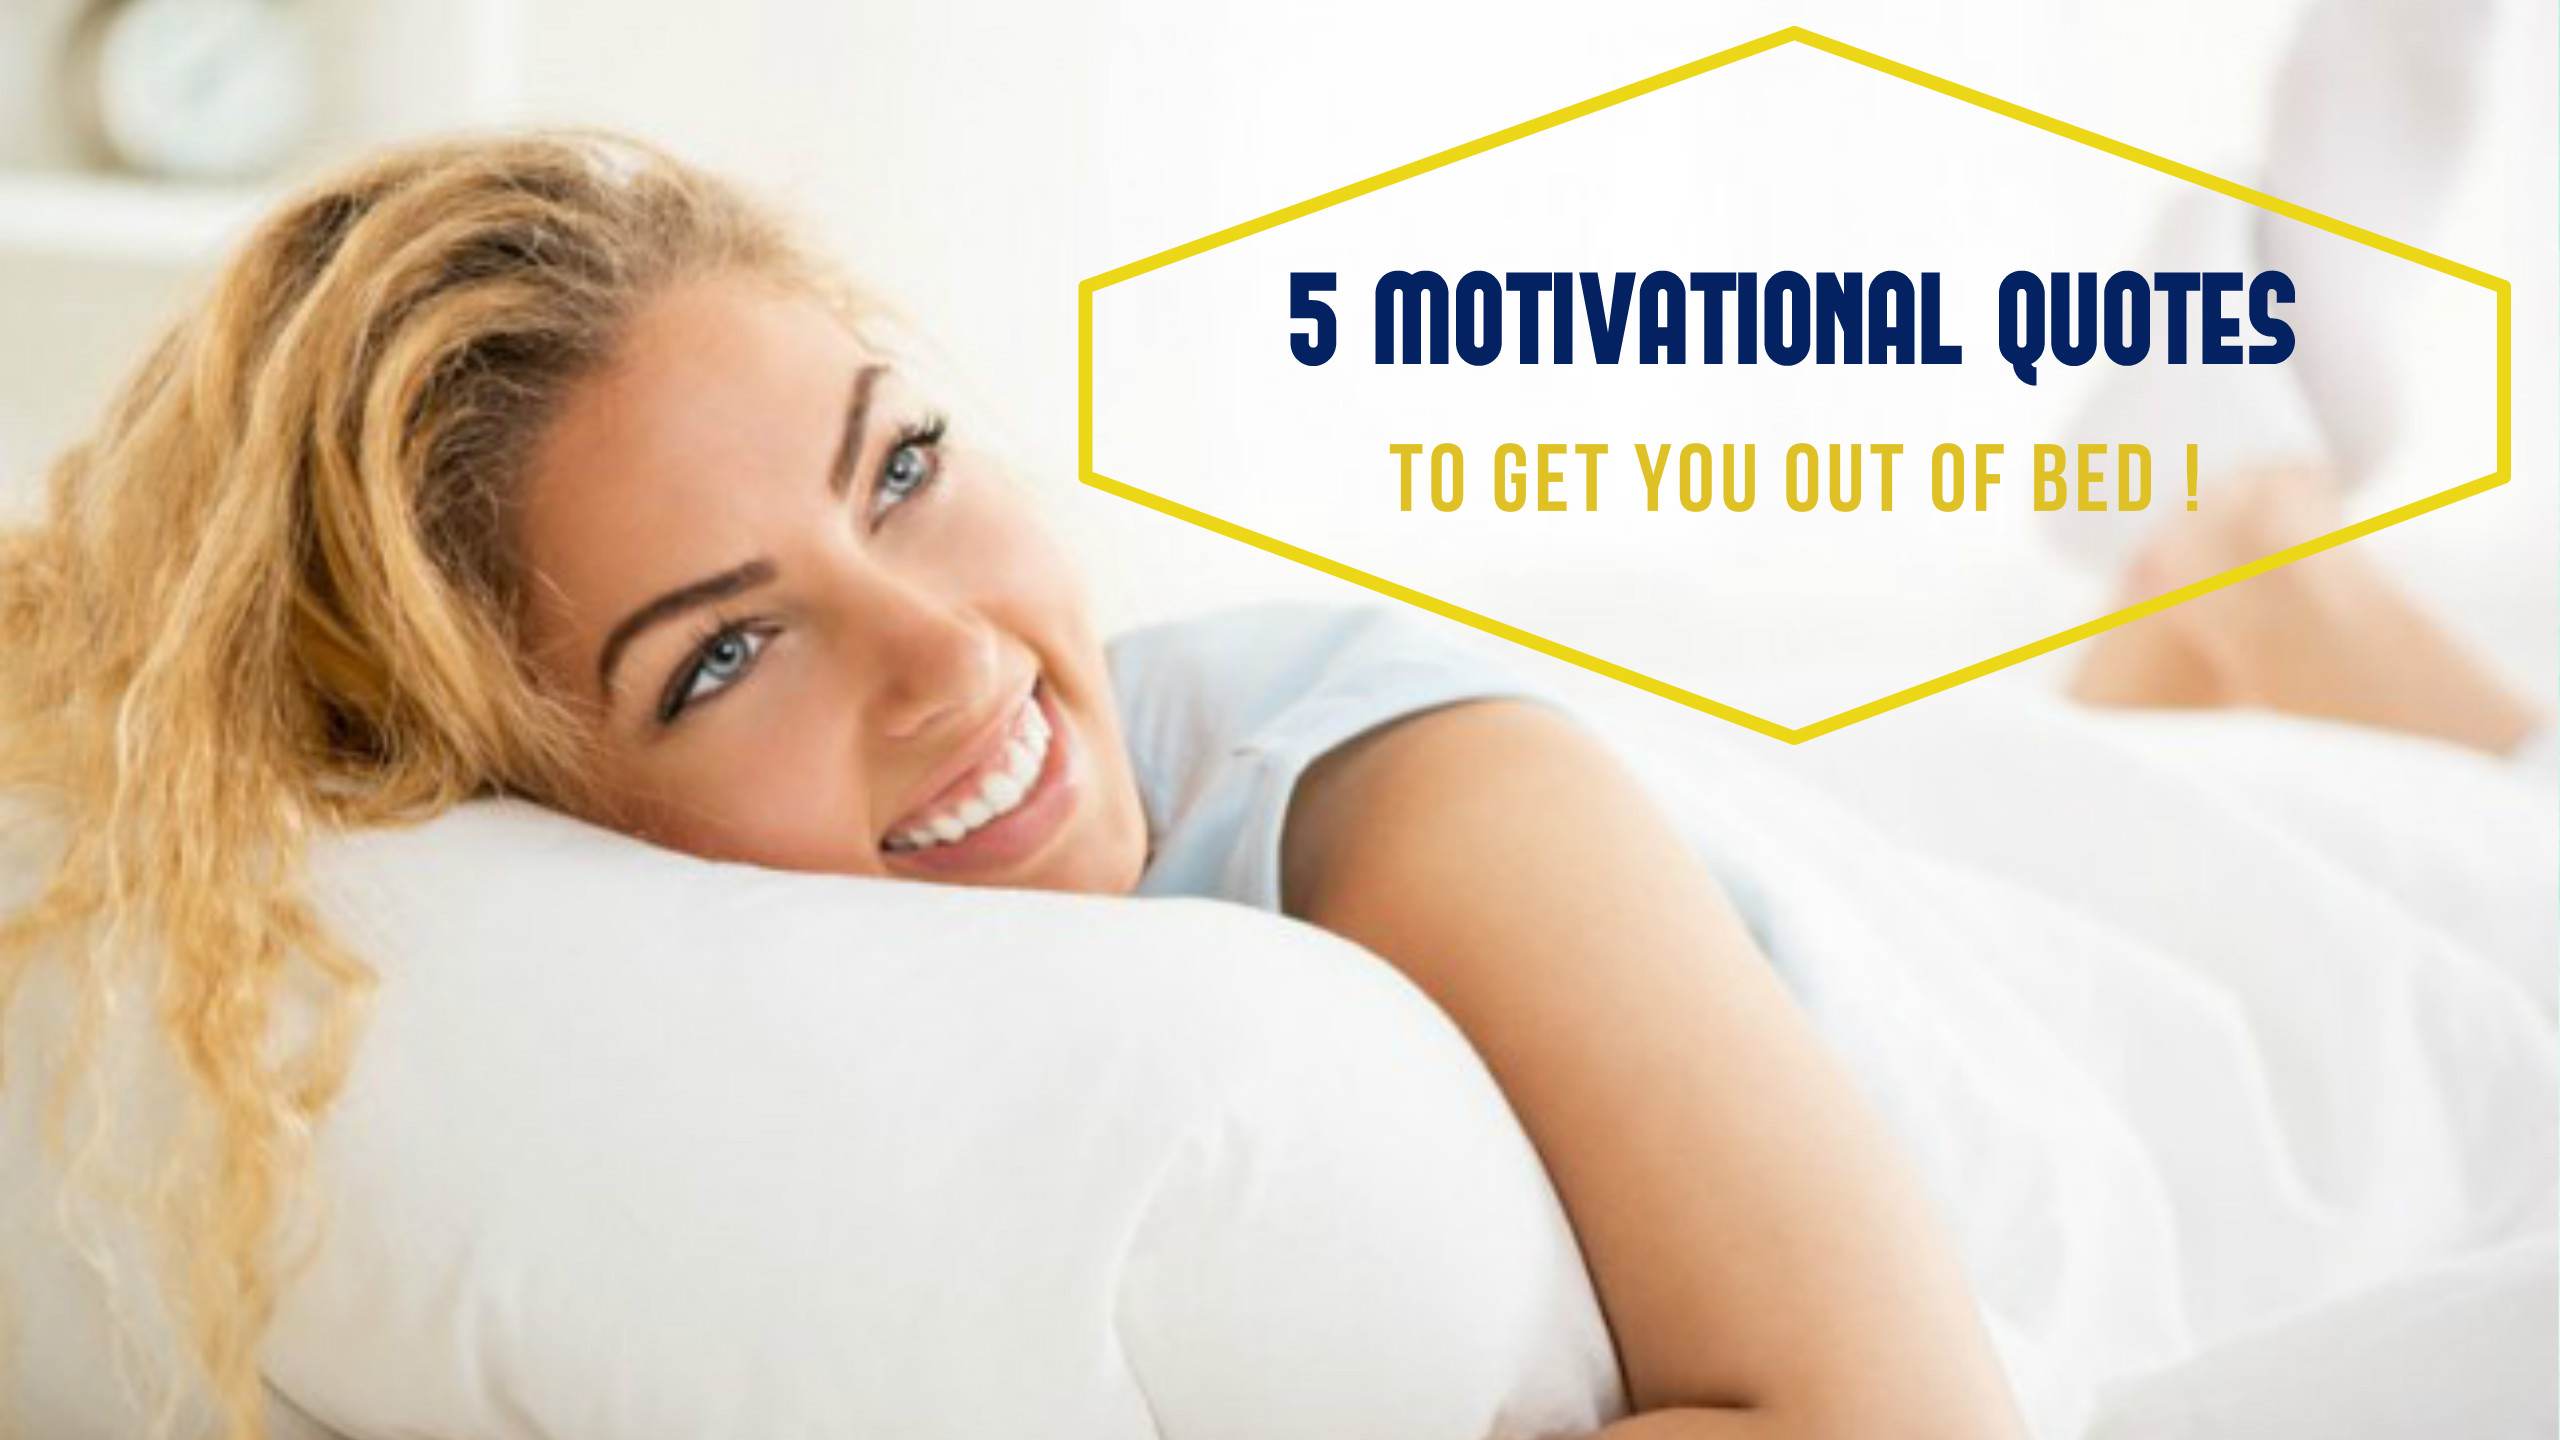 5 Motivational Quotes To Get You Out Of Bed - Women Fitness